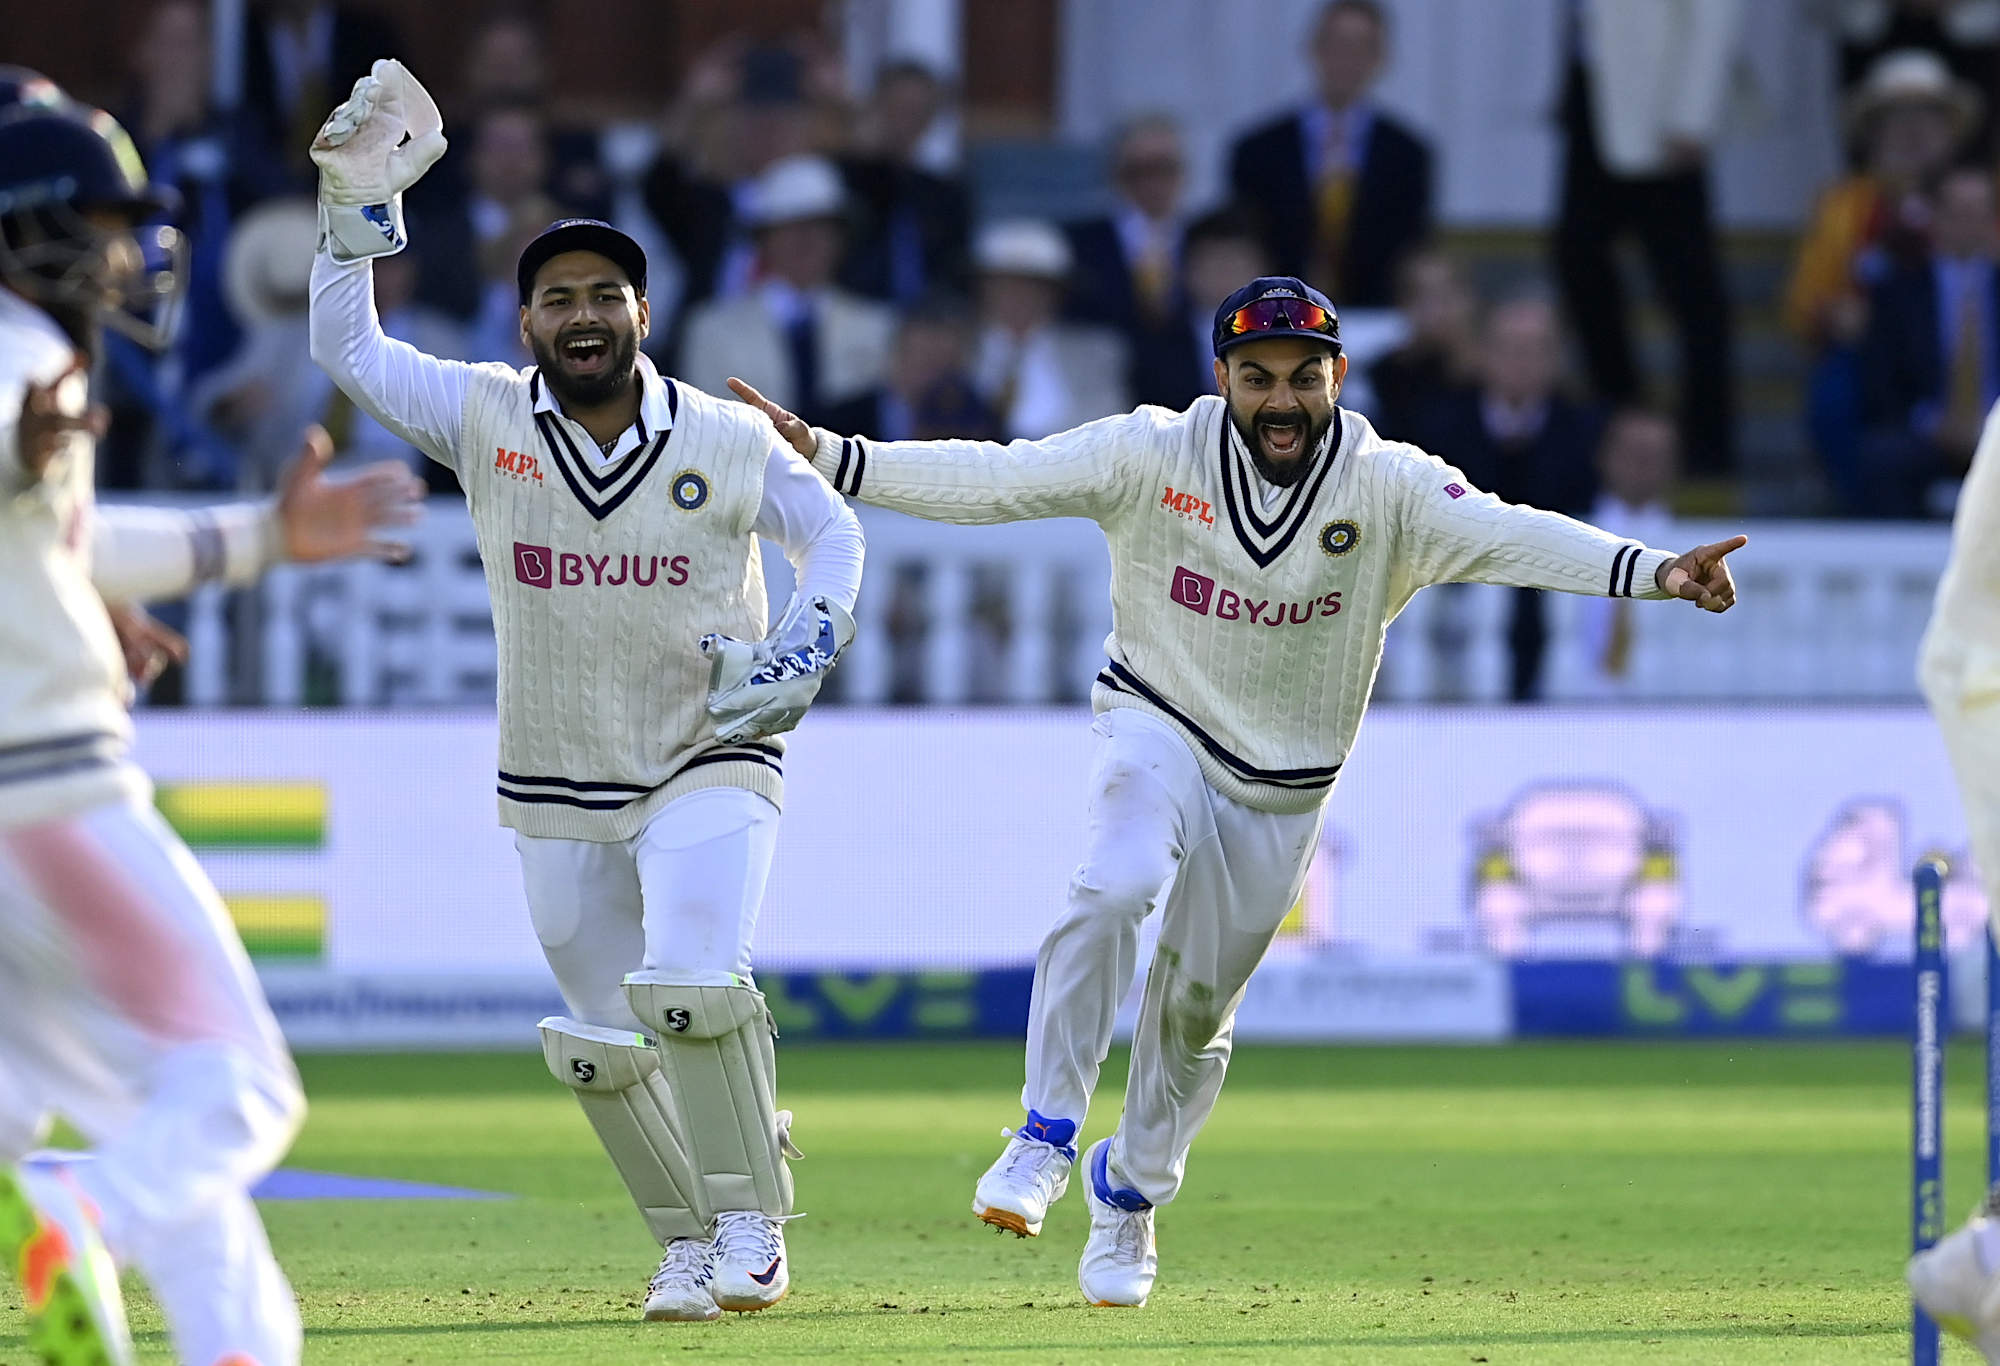 Rishabh Pant and Virat Kohli of India celebrate the final wicket and winning the Second LV= Insurance Test Match